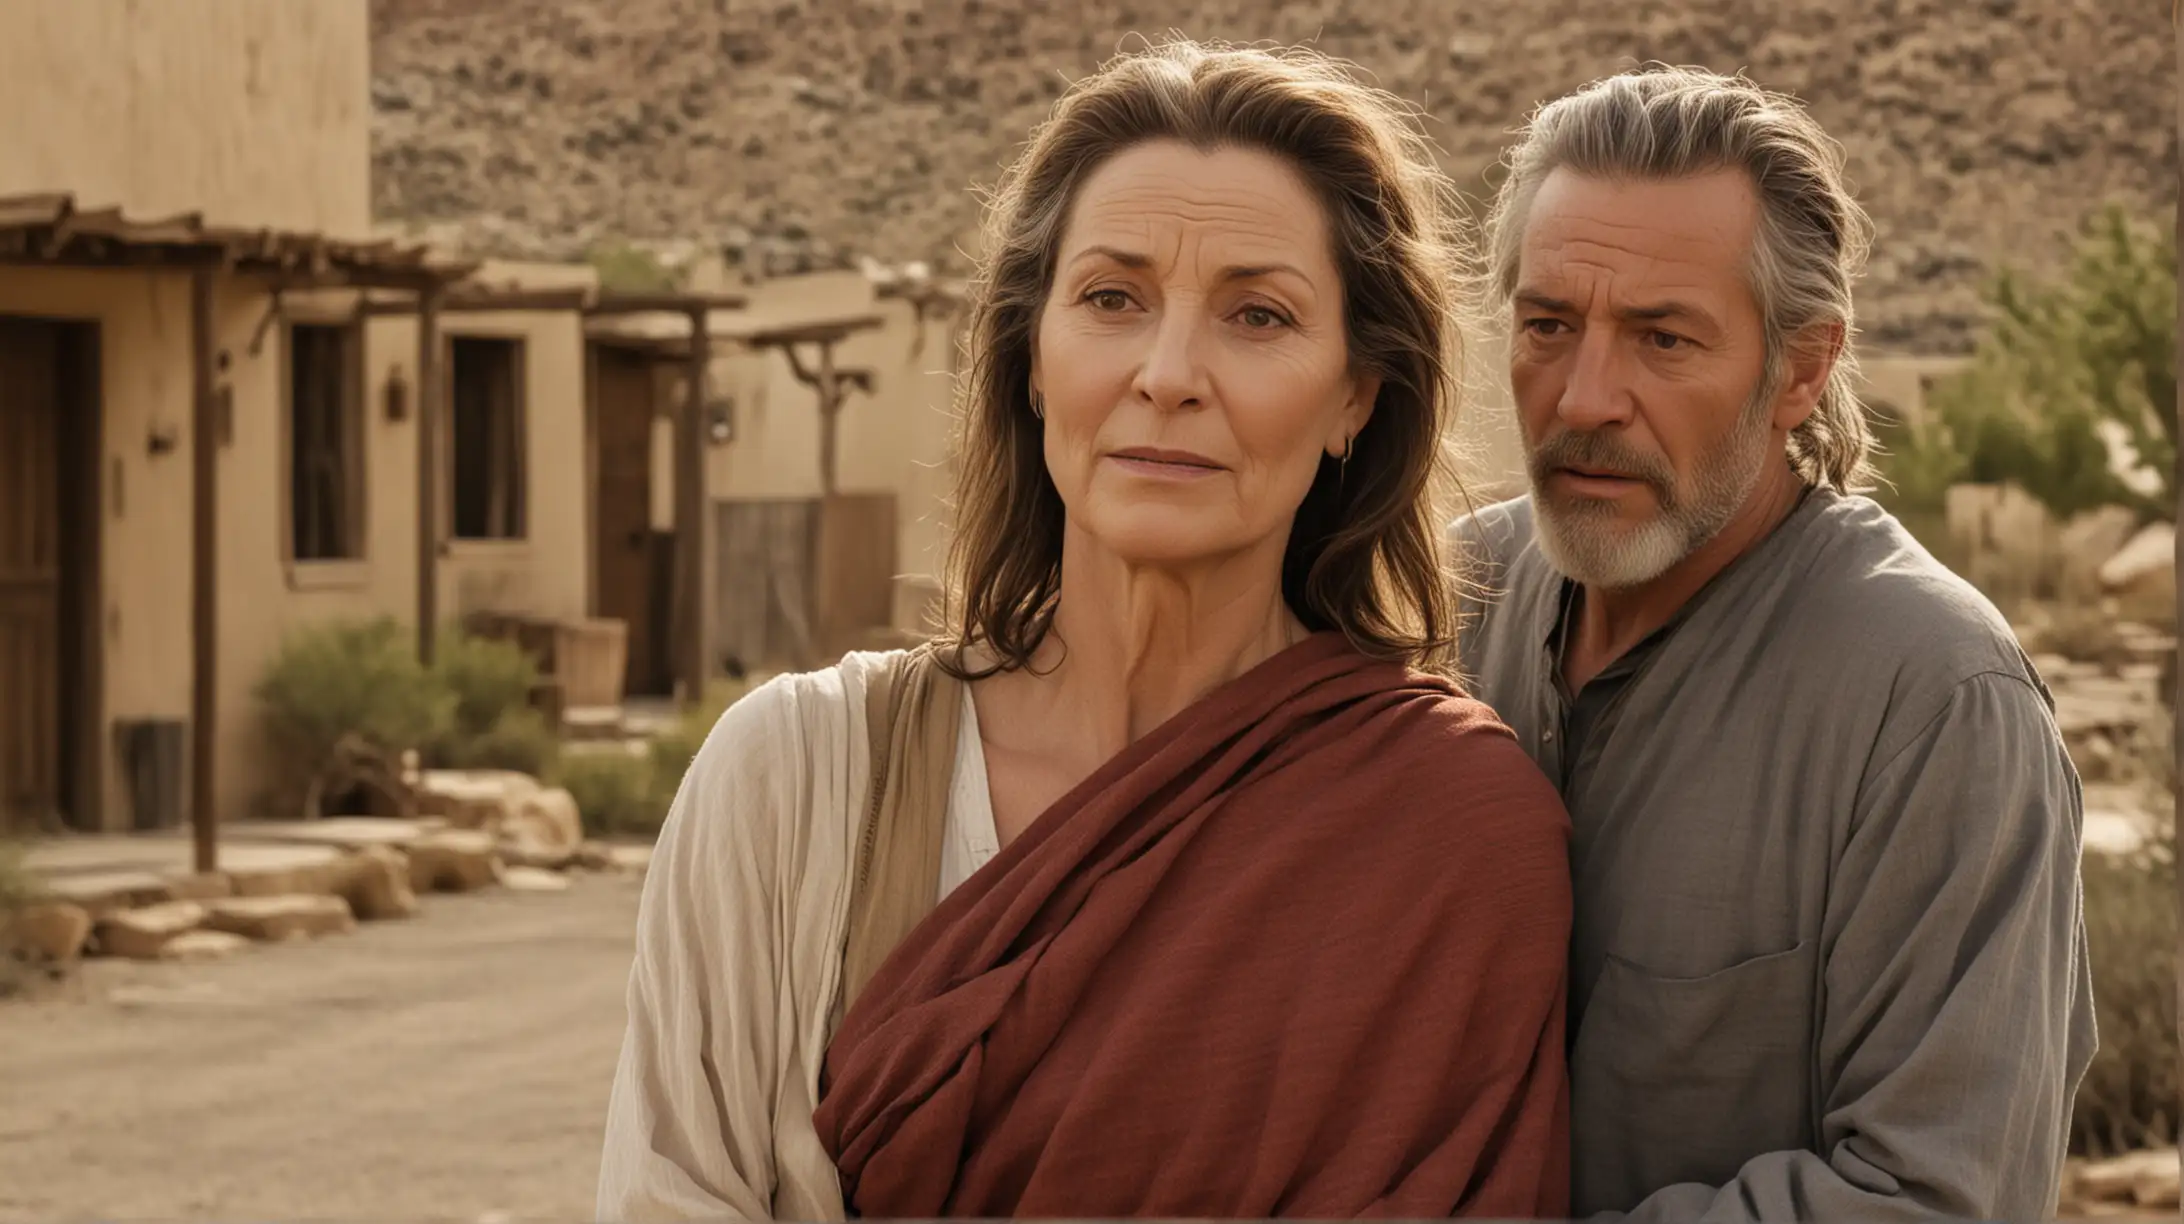 Elegant Mother and Son in Ancient Desert Townscape